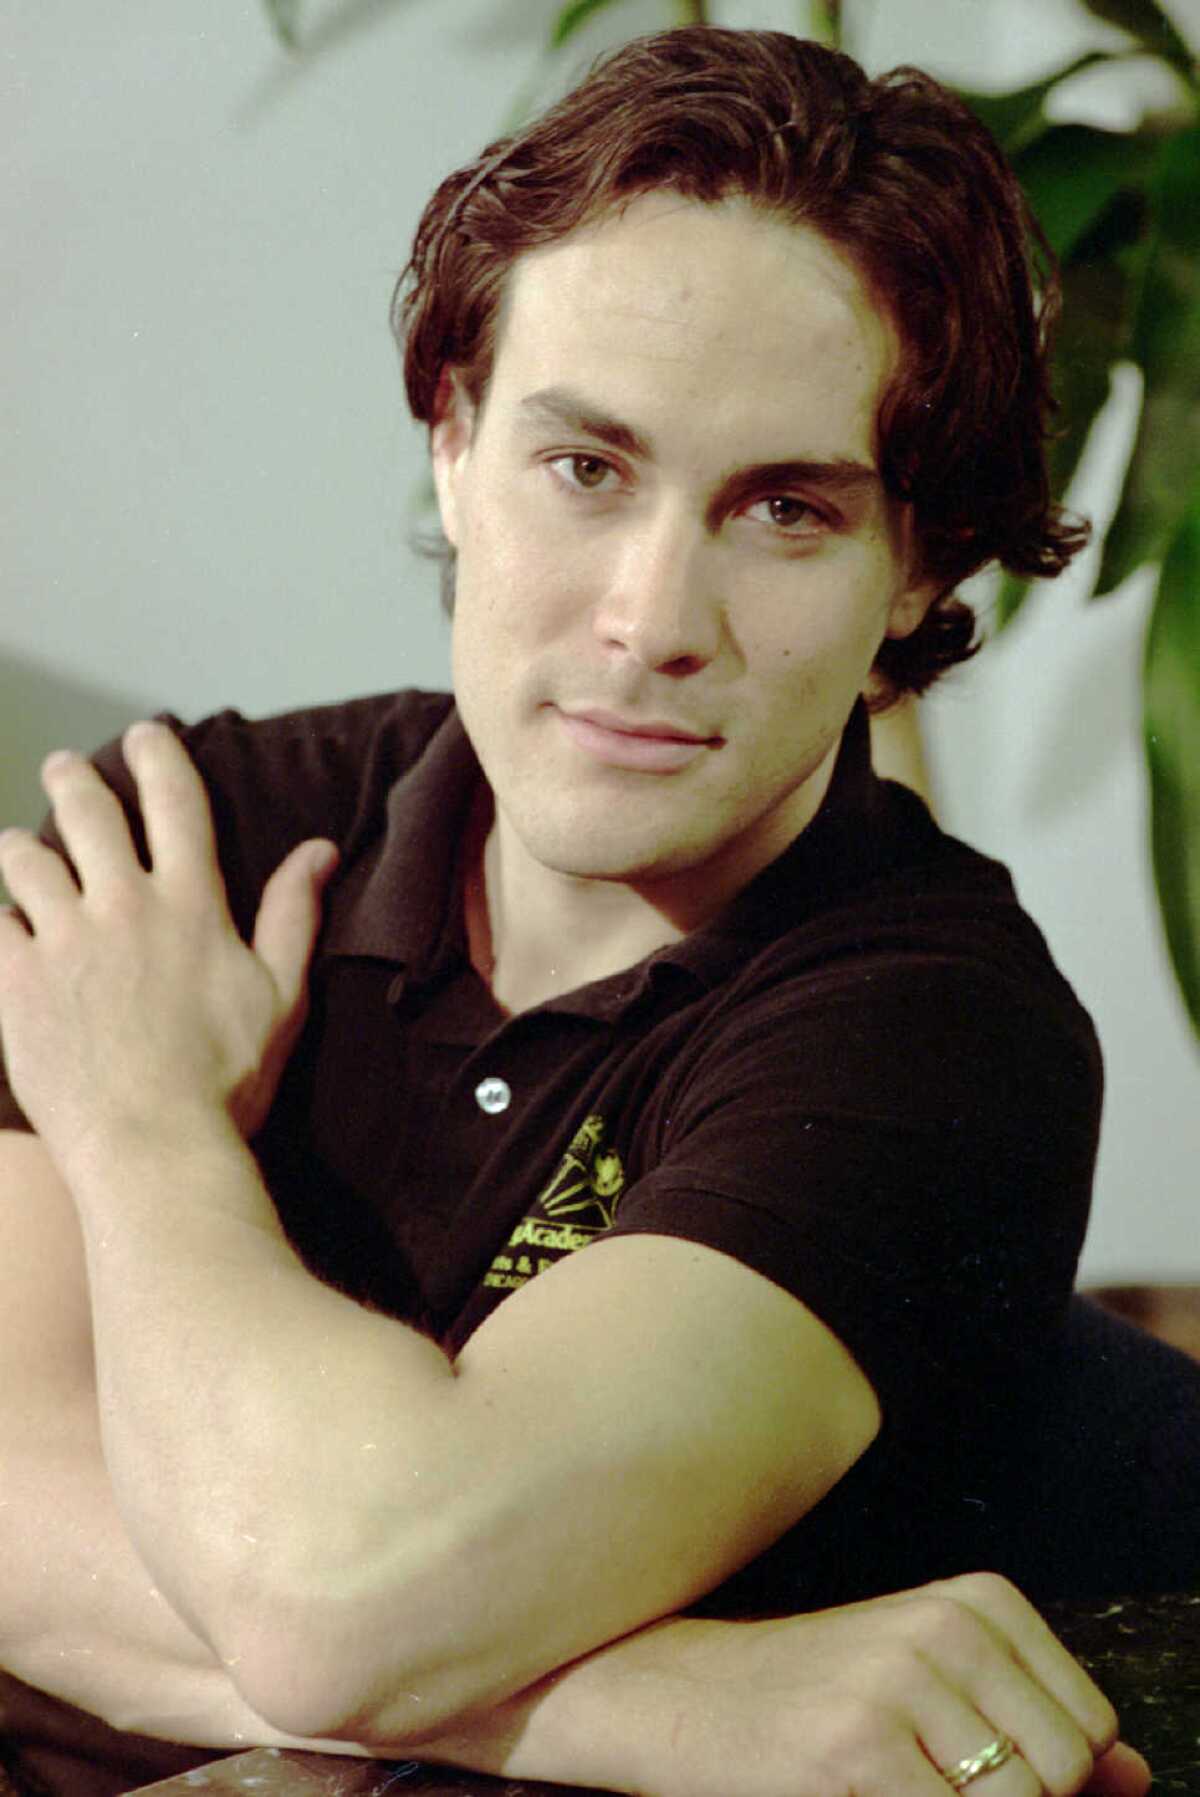 Actor Brandon Lee was fatally shot by a prop gun during filming of "The Crow" in 1993.